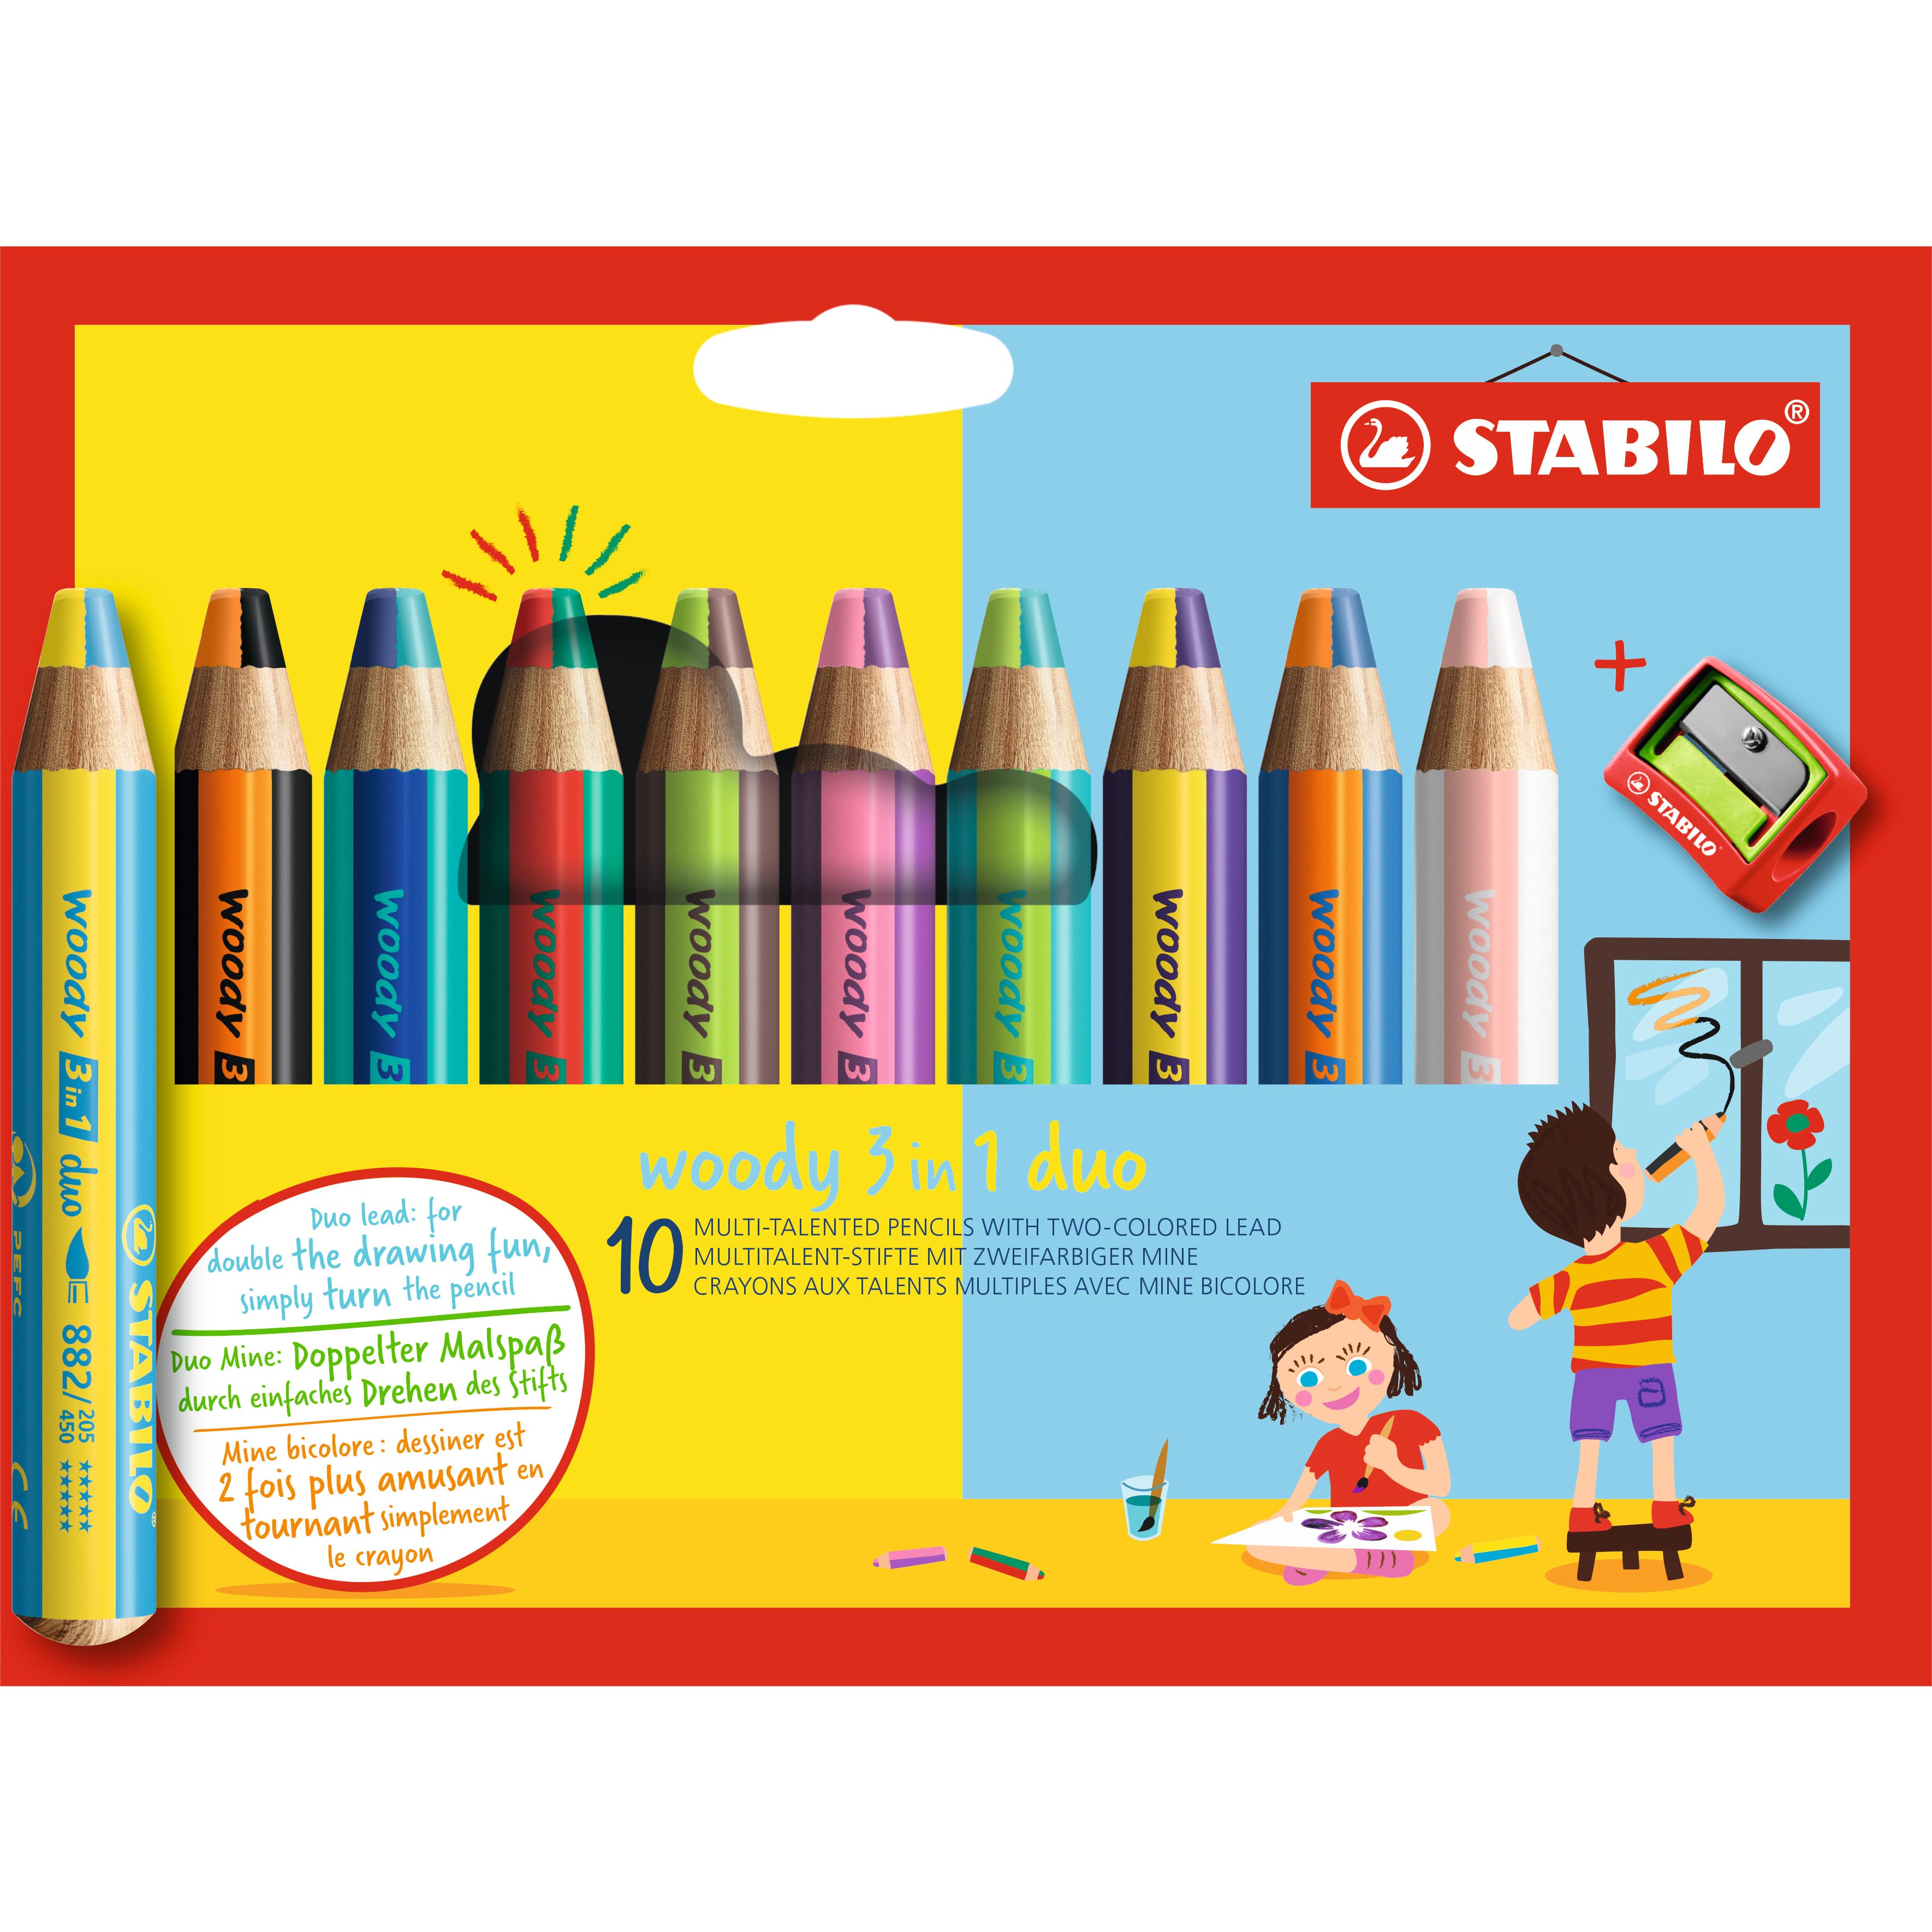 Stabilo&#xAE; Woody 3-in-1 Duo 11 Piece Colored Pencil Set